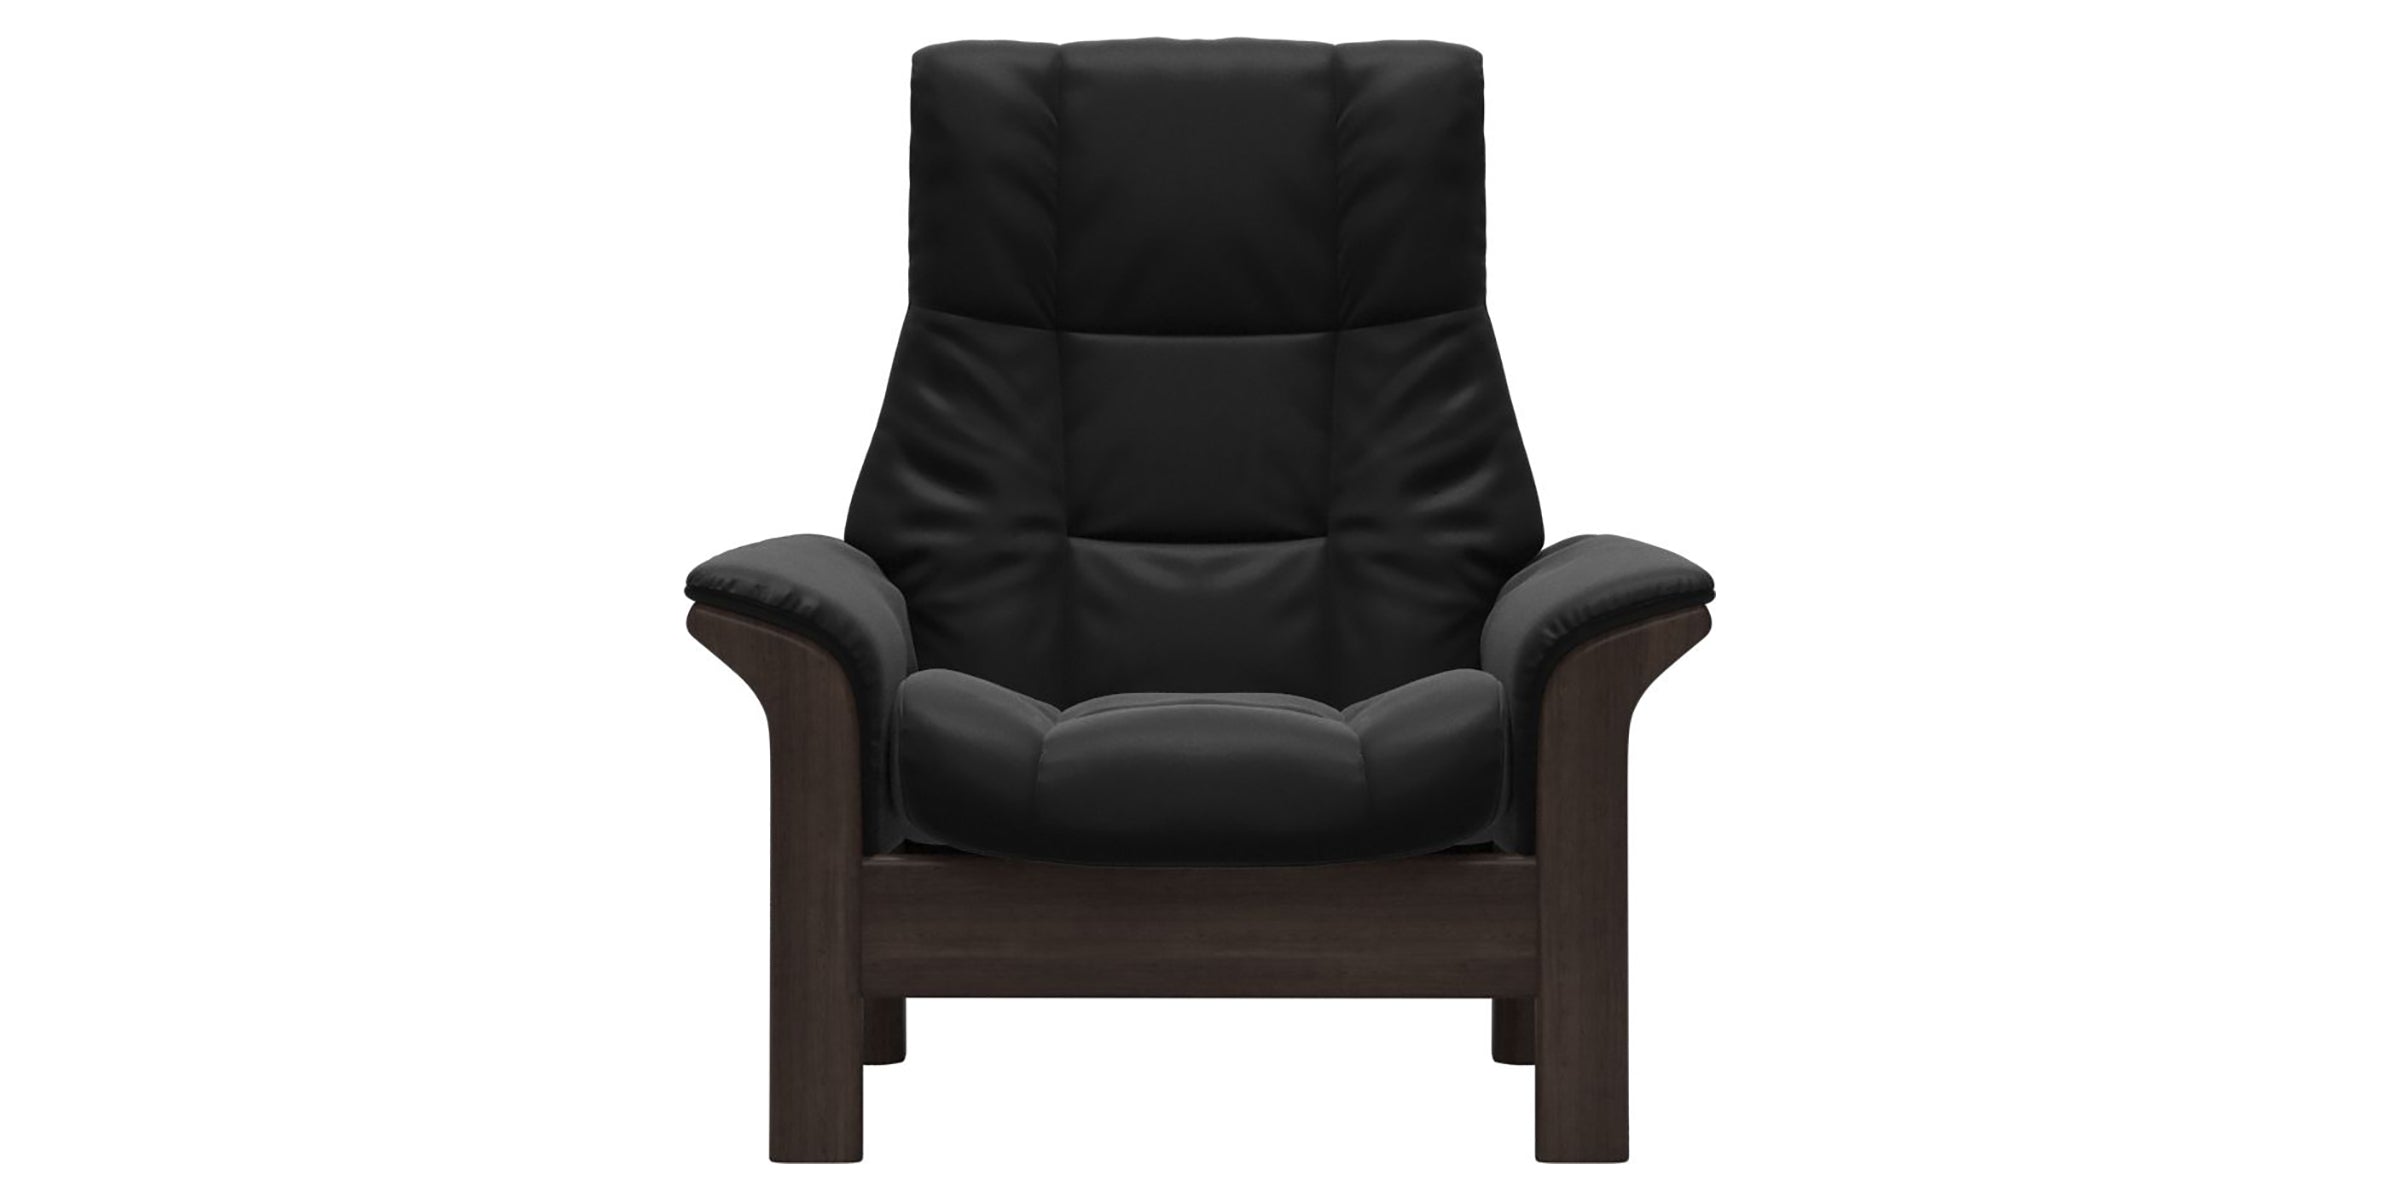 Paloma Leather Black and Wenge Base | Stressless Windsor High Back Chair | Valley Ridge Furniture